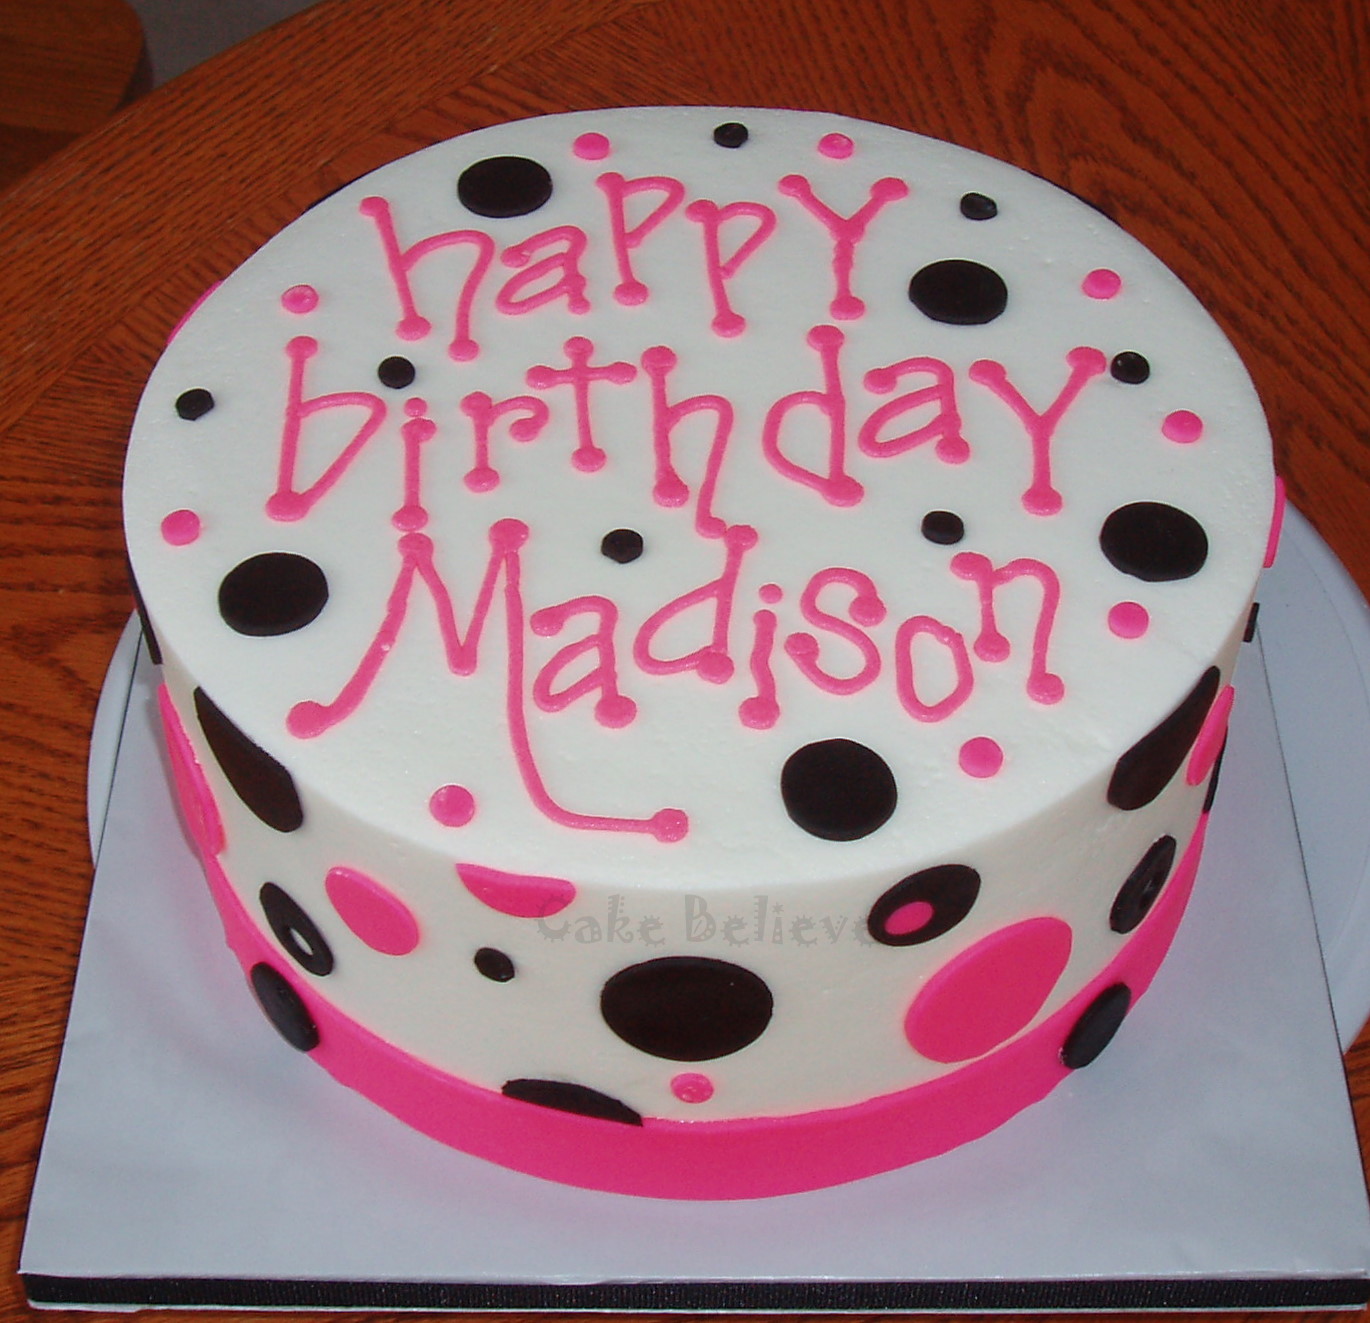 cool cake ideas for teenage girls Iced in buttercream with fondant accents!